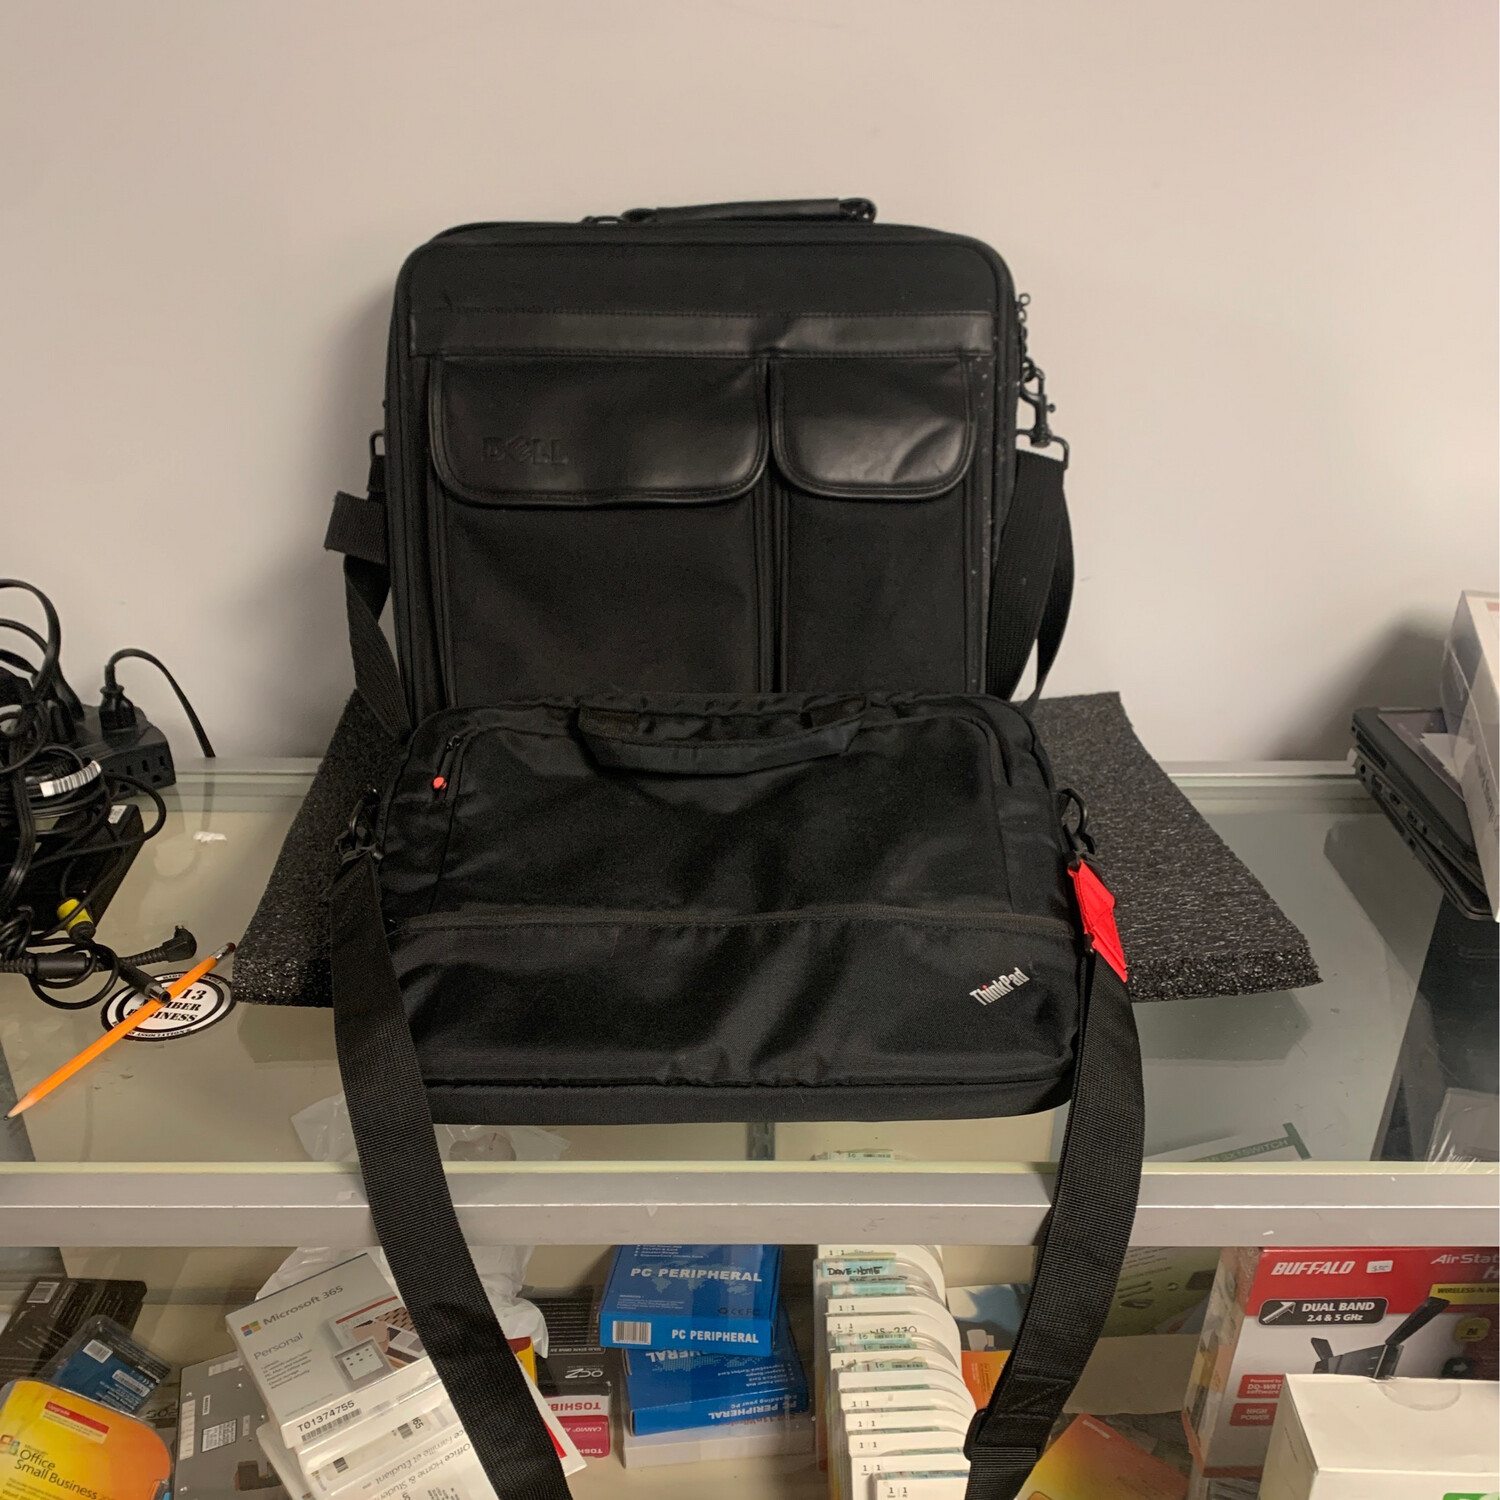 Grade A Laptop Bags - Many Different Size And Brands In Stock